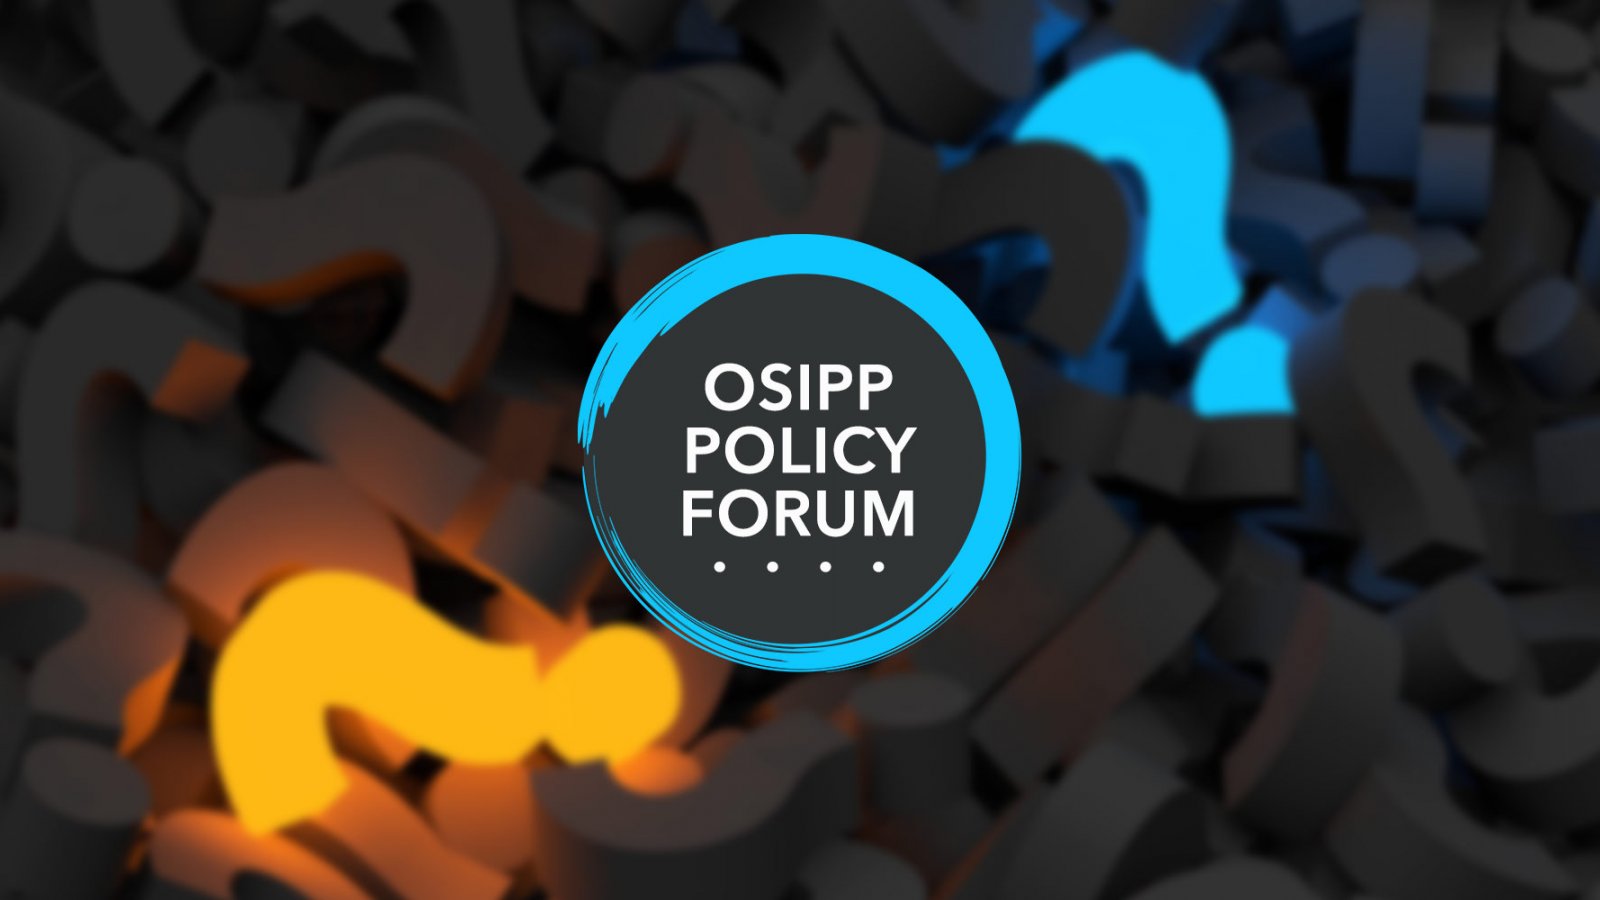 OSIPP Policy Forum